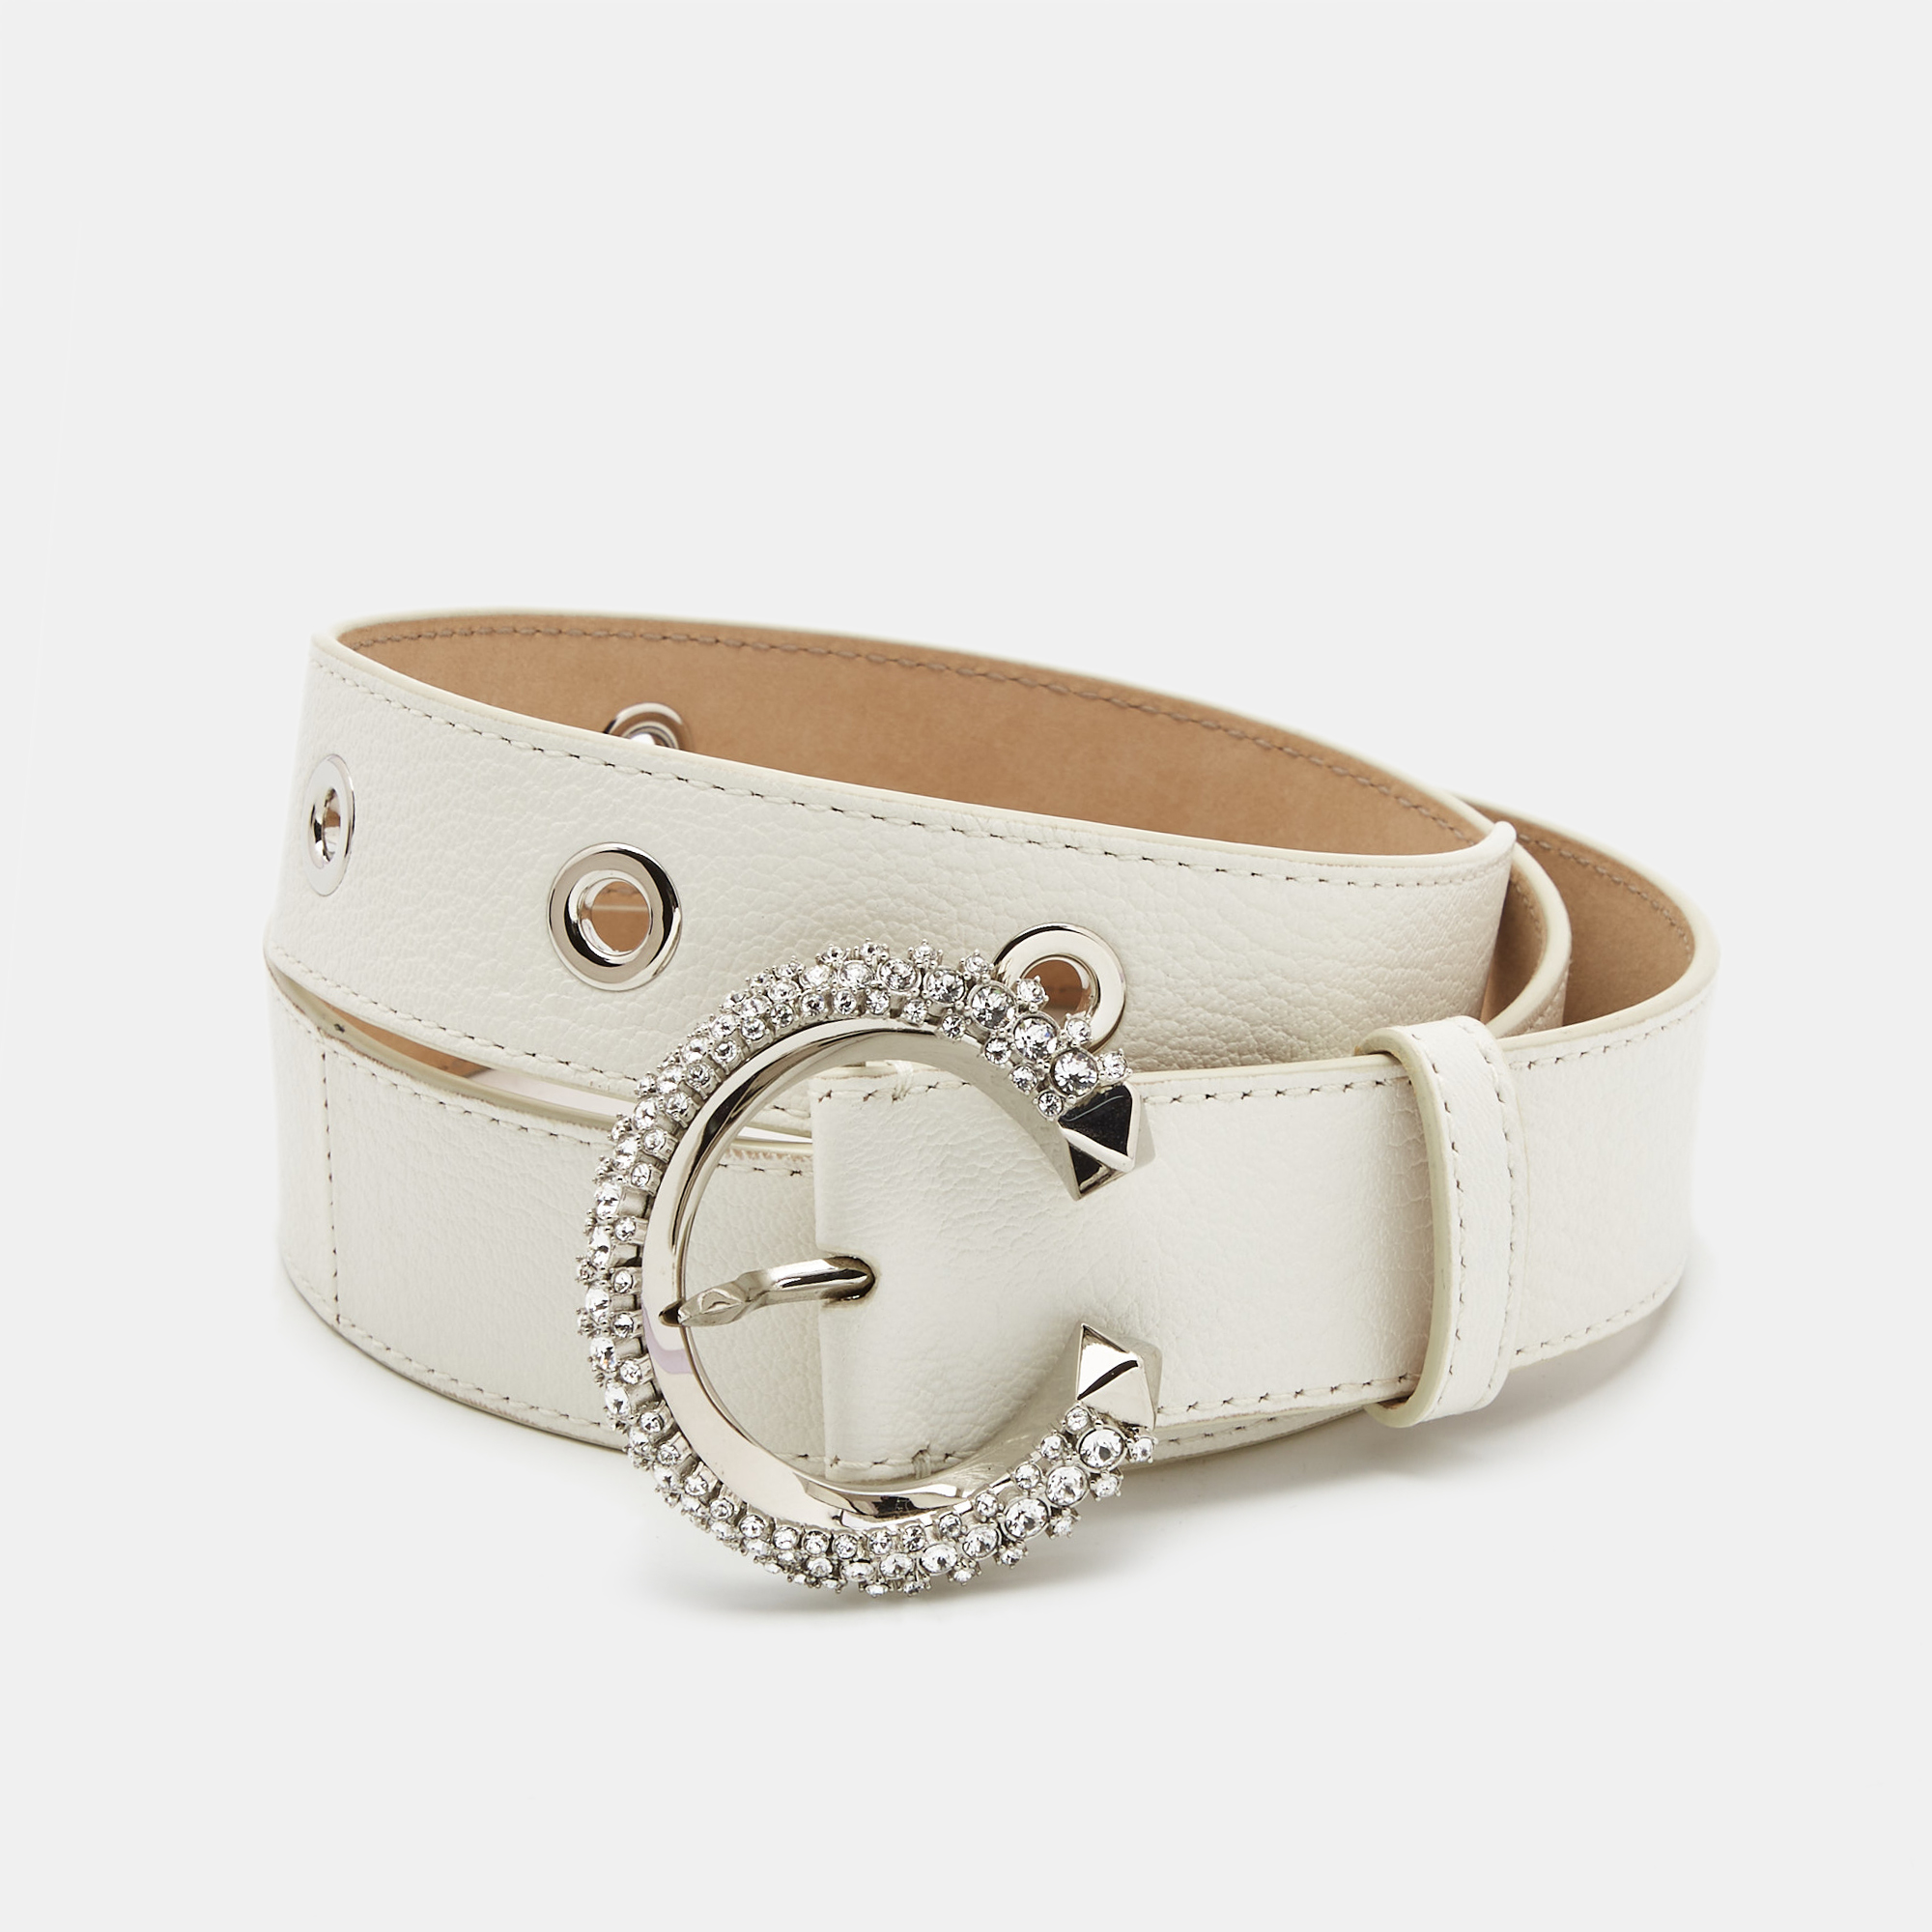 Jimmy choo white leather madeline crystals belt s